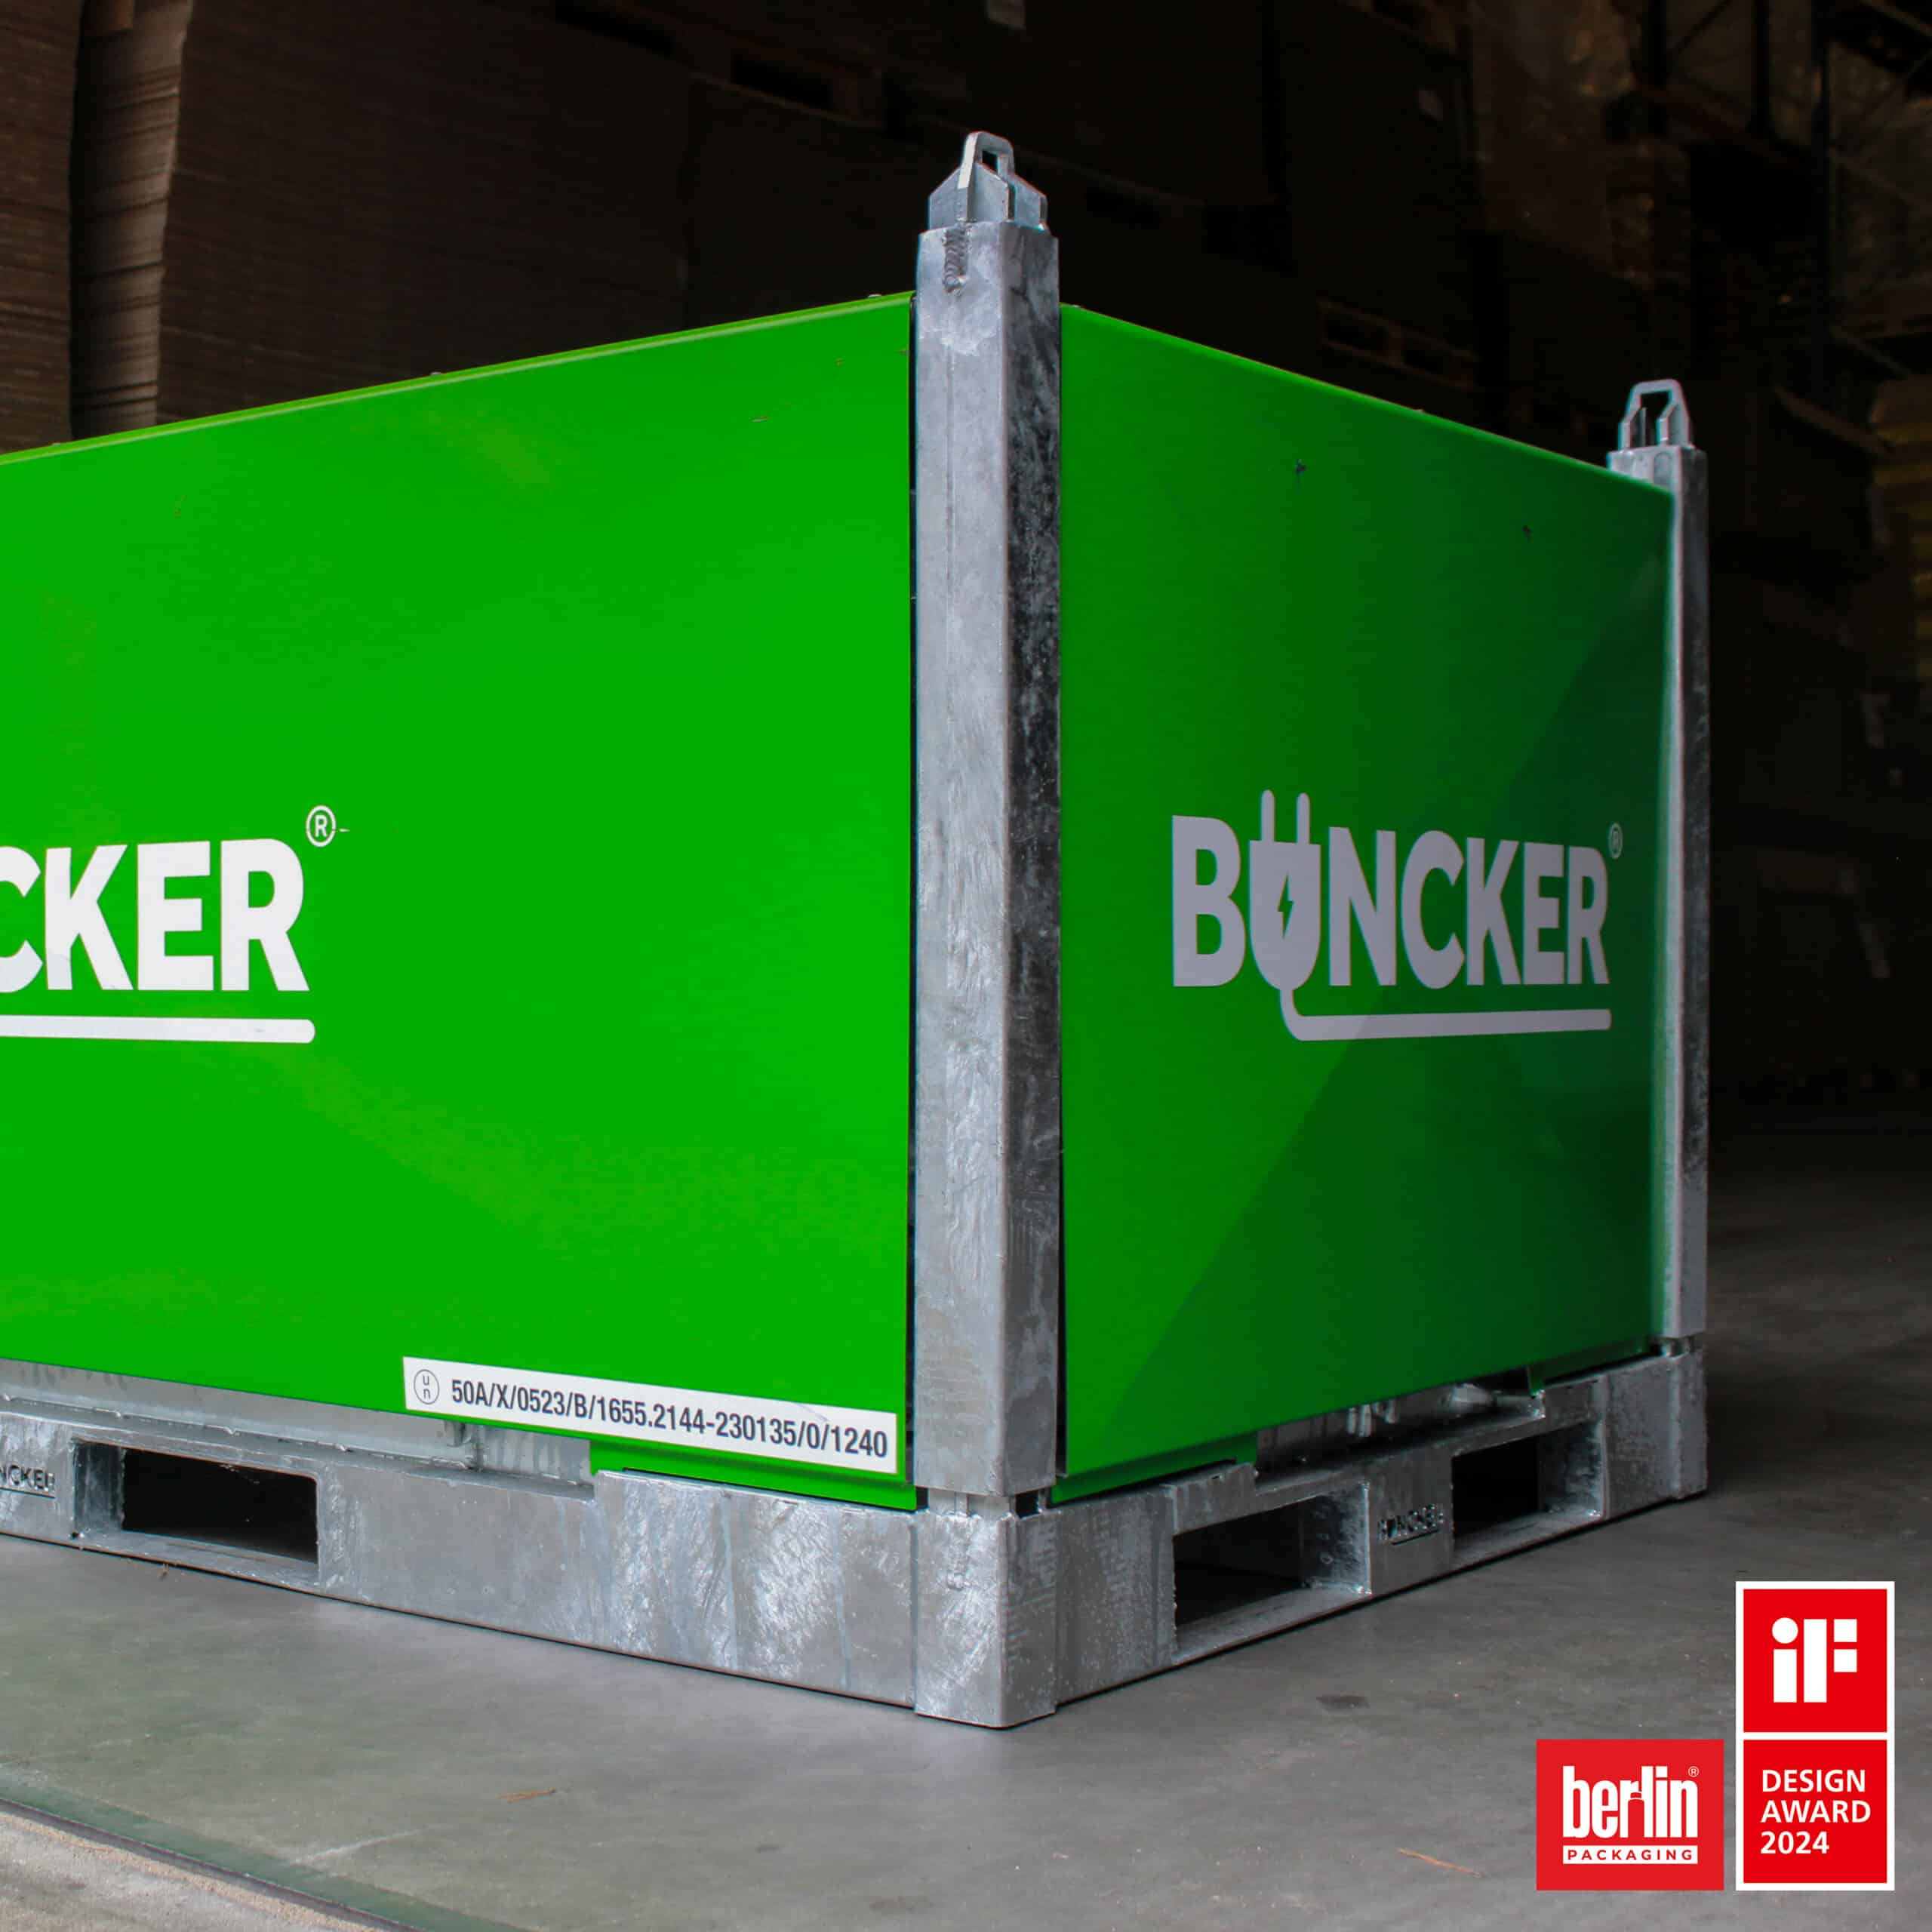 Buncker Picture 1 IF Design Berlin Packaging vierkant scaled